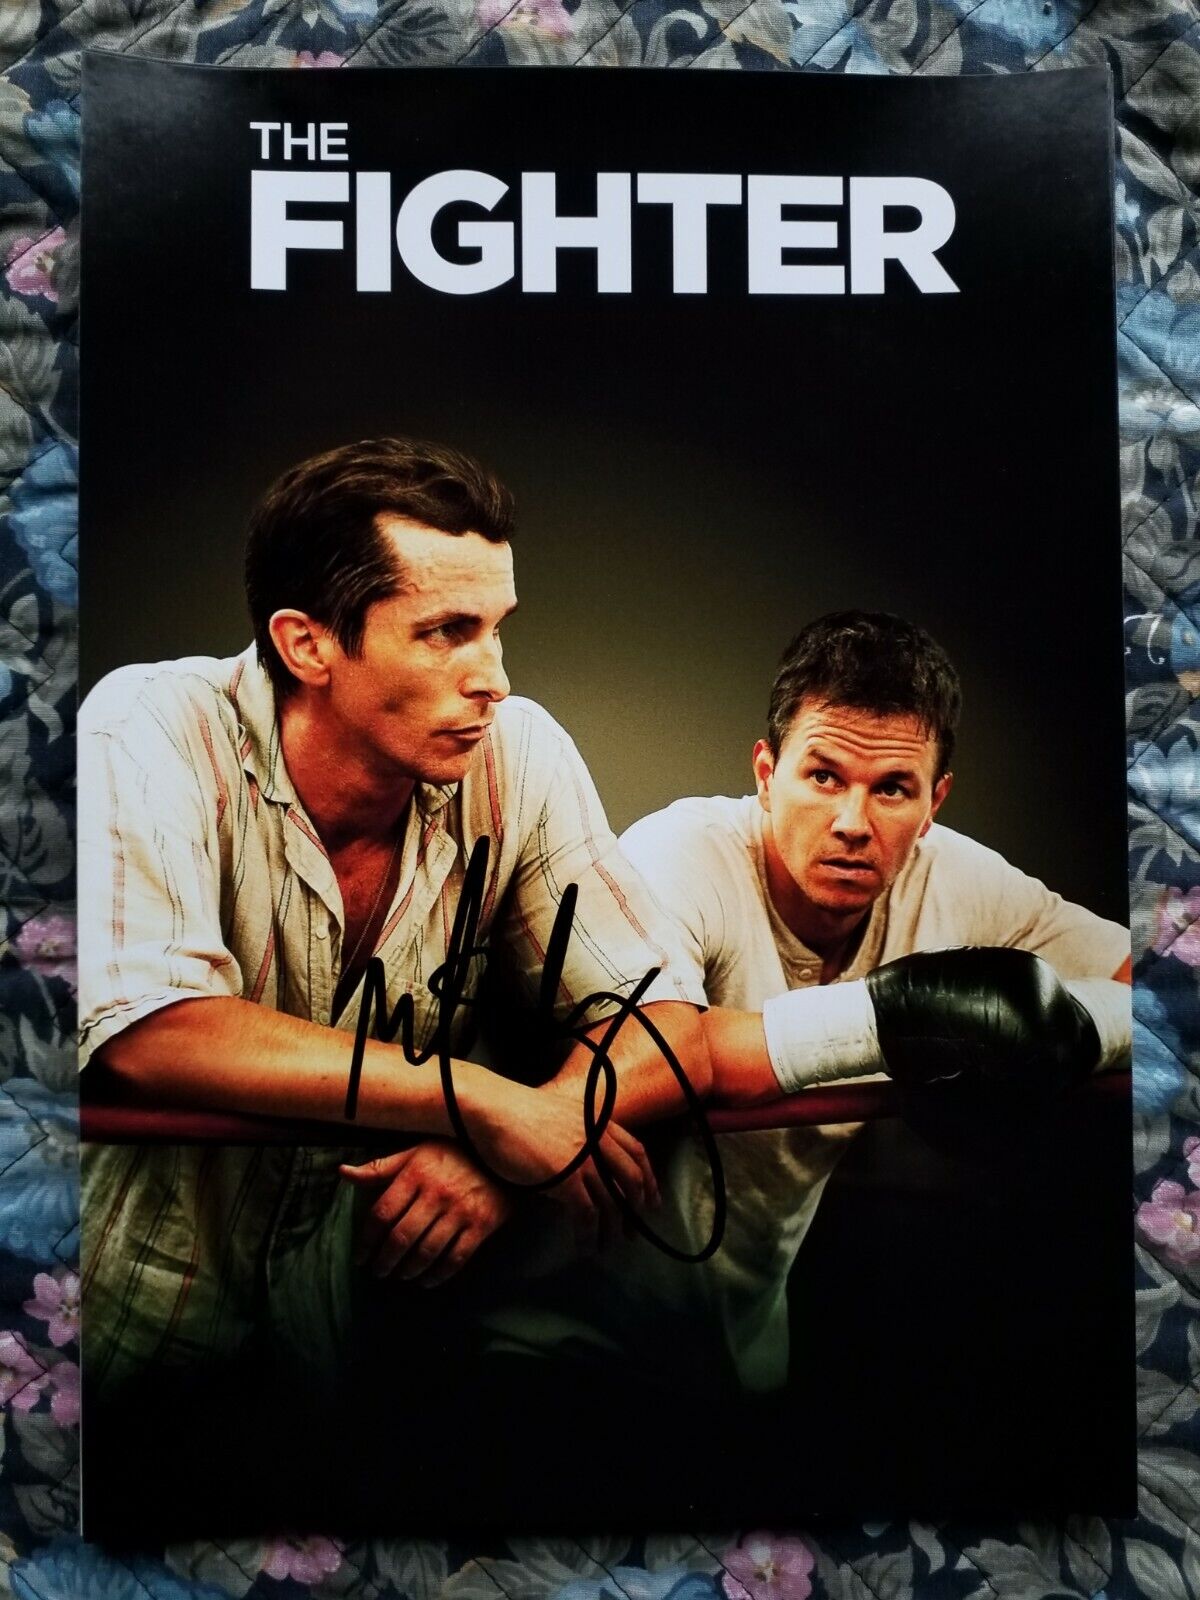 MARK WAHLBERG SIGNED AUTHENTIC 8.2 x 11.5 Autographed Photo Poster painting - The Fighter - Ted